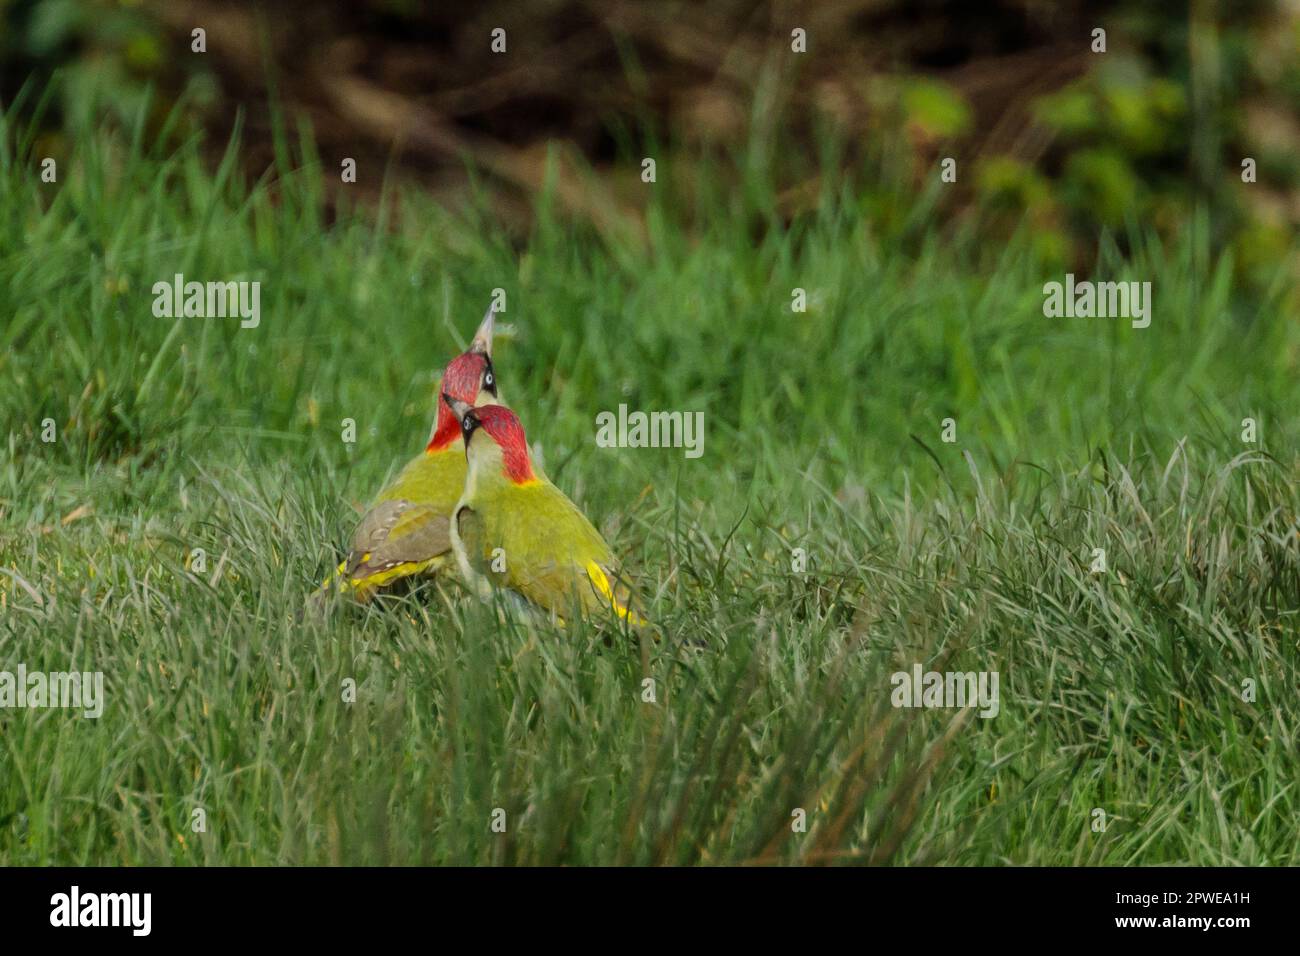 Male and Female European Green Woodpeckers, Picus viridis, courting on grass. Photo by Amanda Rose/Alamy Stock Photo